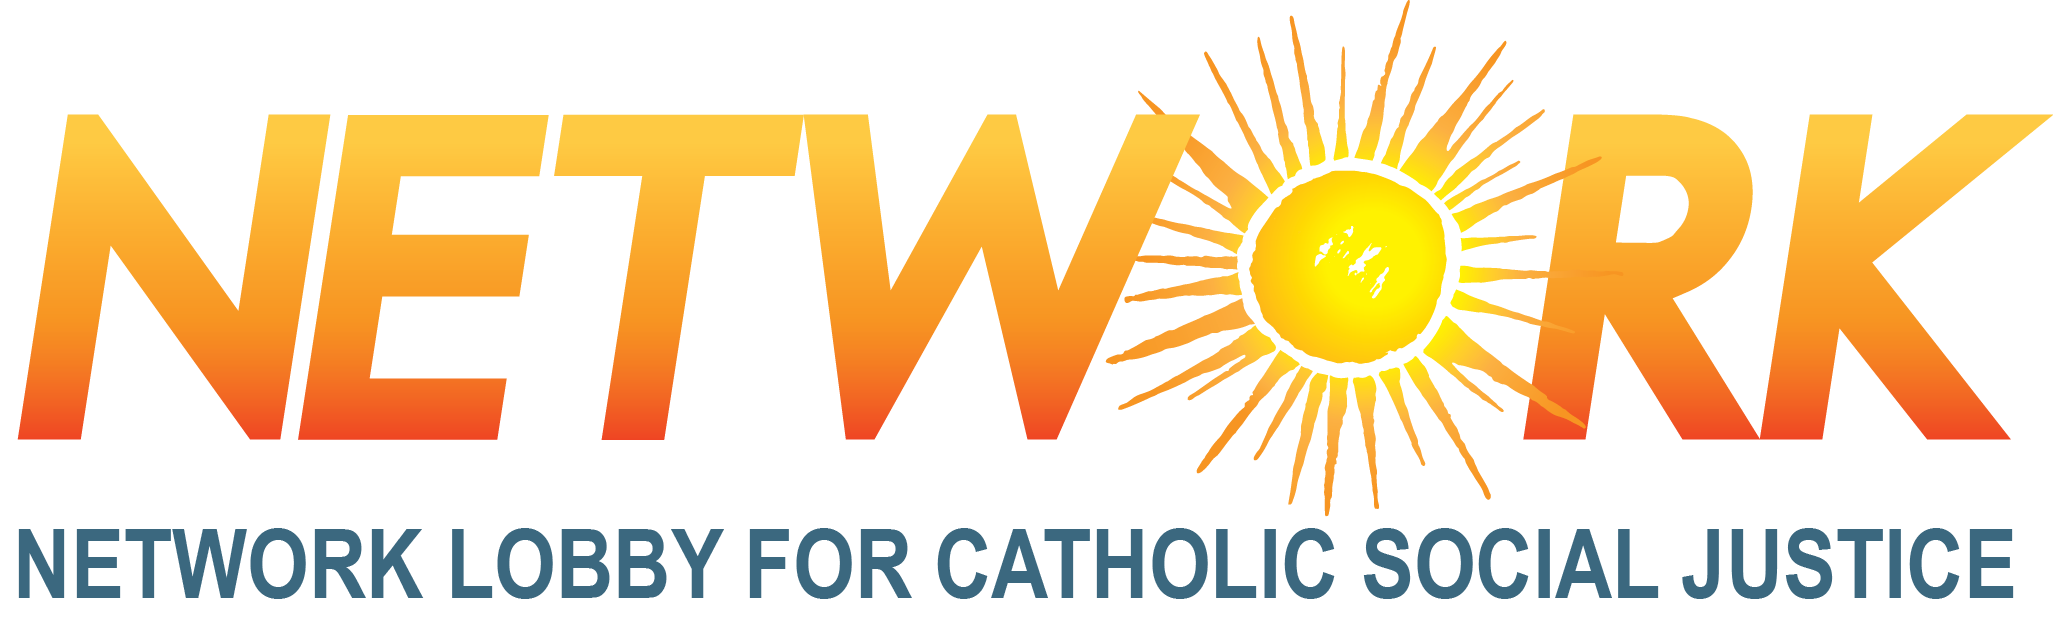 NETWORK Lobby for Catholic Social Justice - 7.32